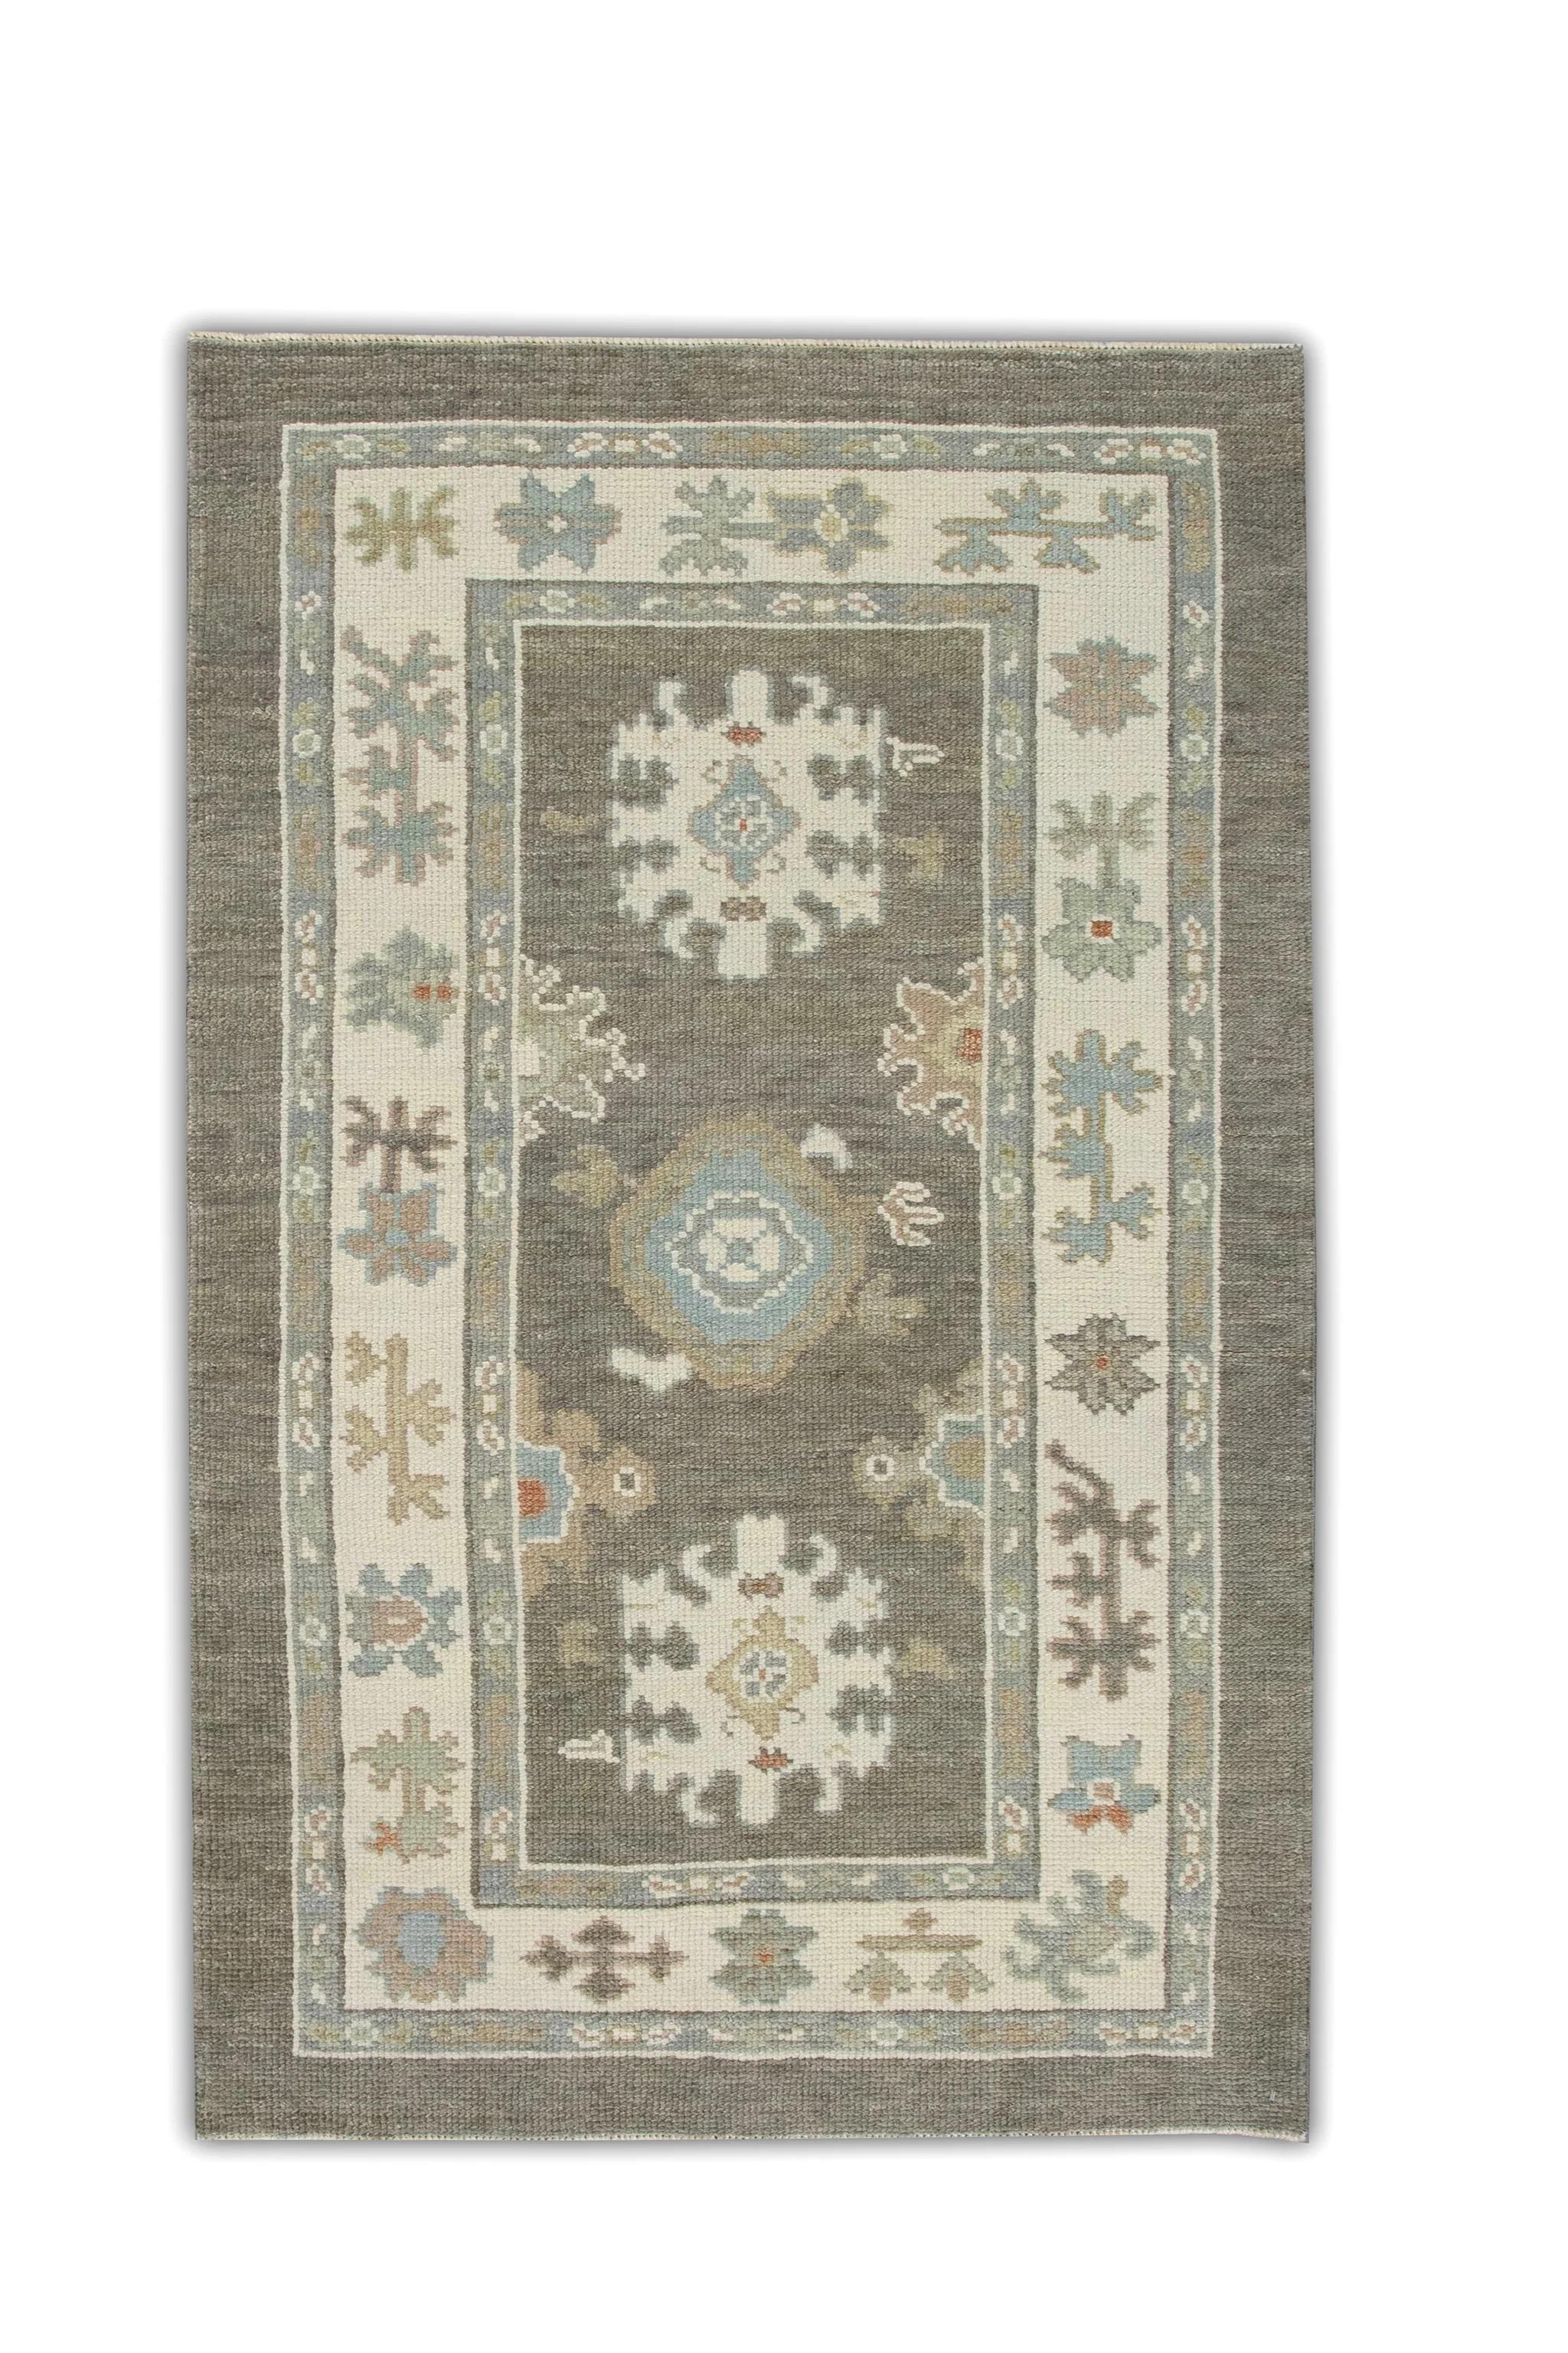 Olive Green Floral Handwoven Wool Turkish Oushak Rug 3' x 5'4